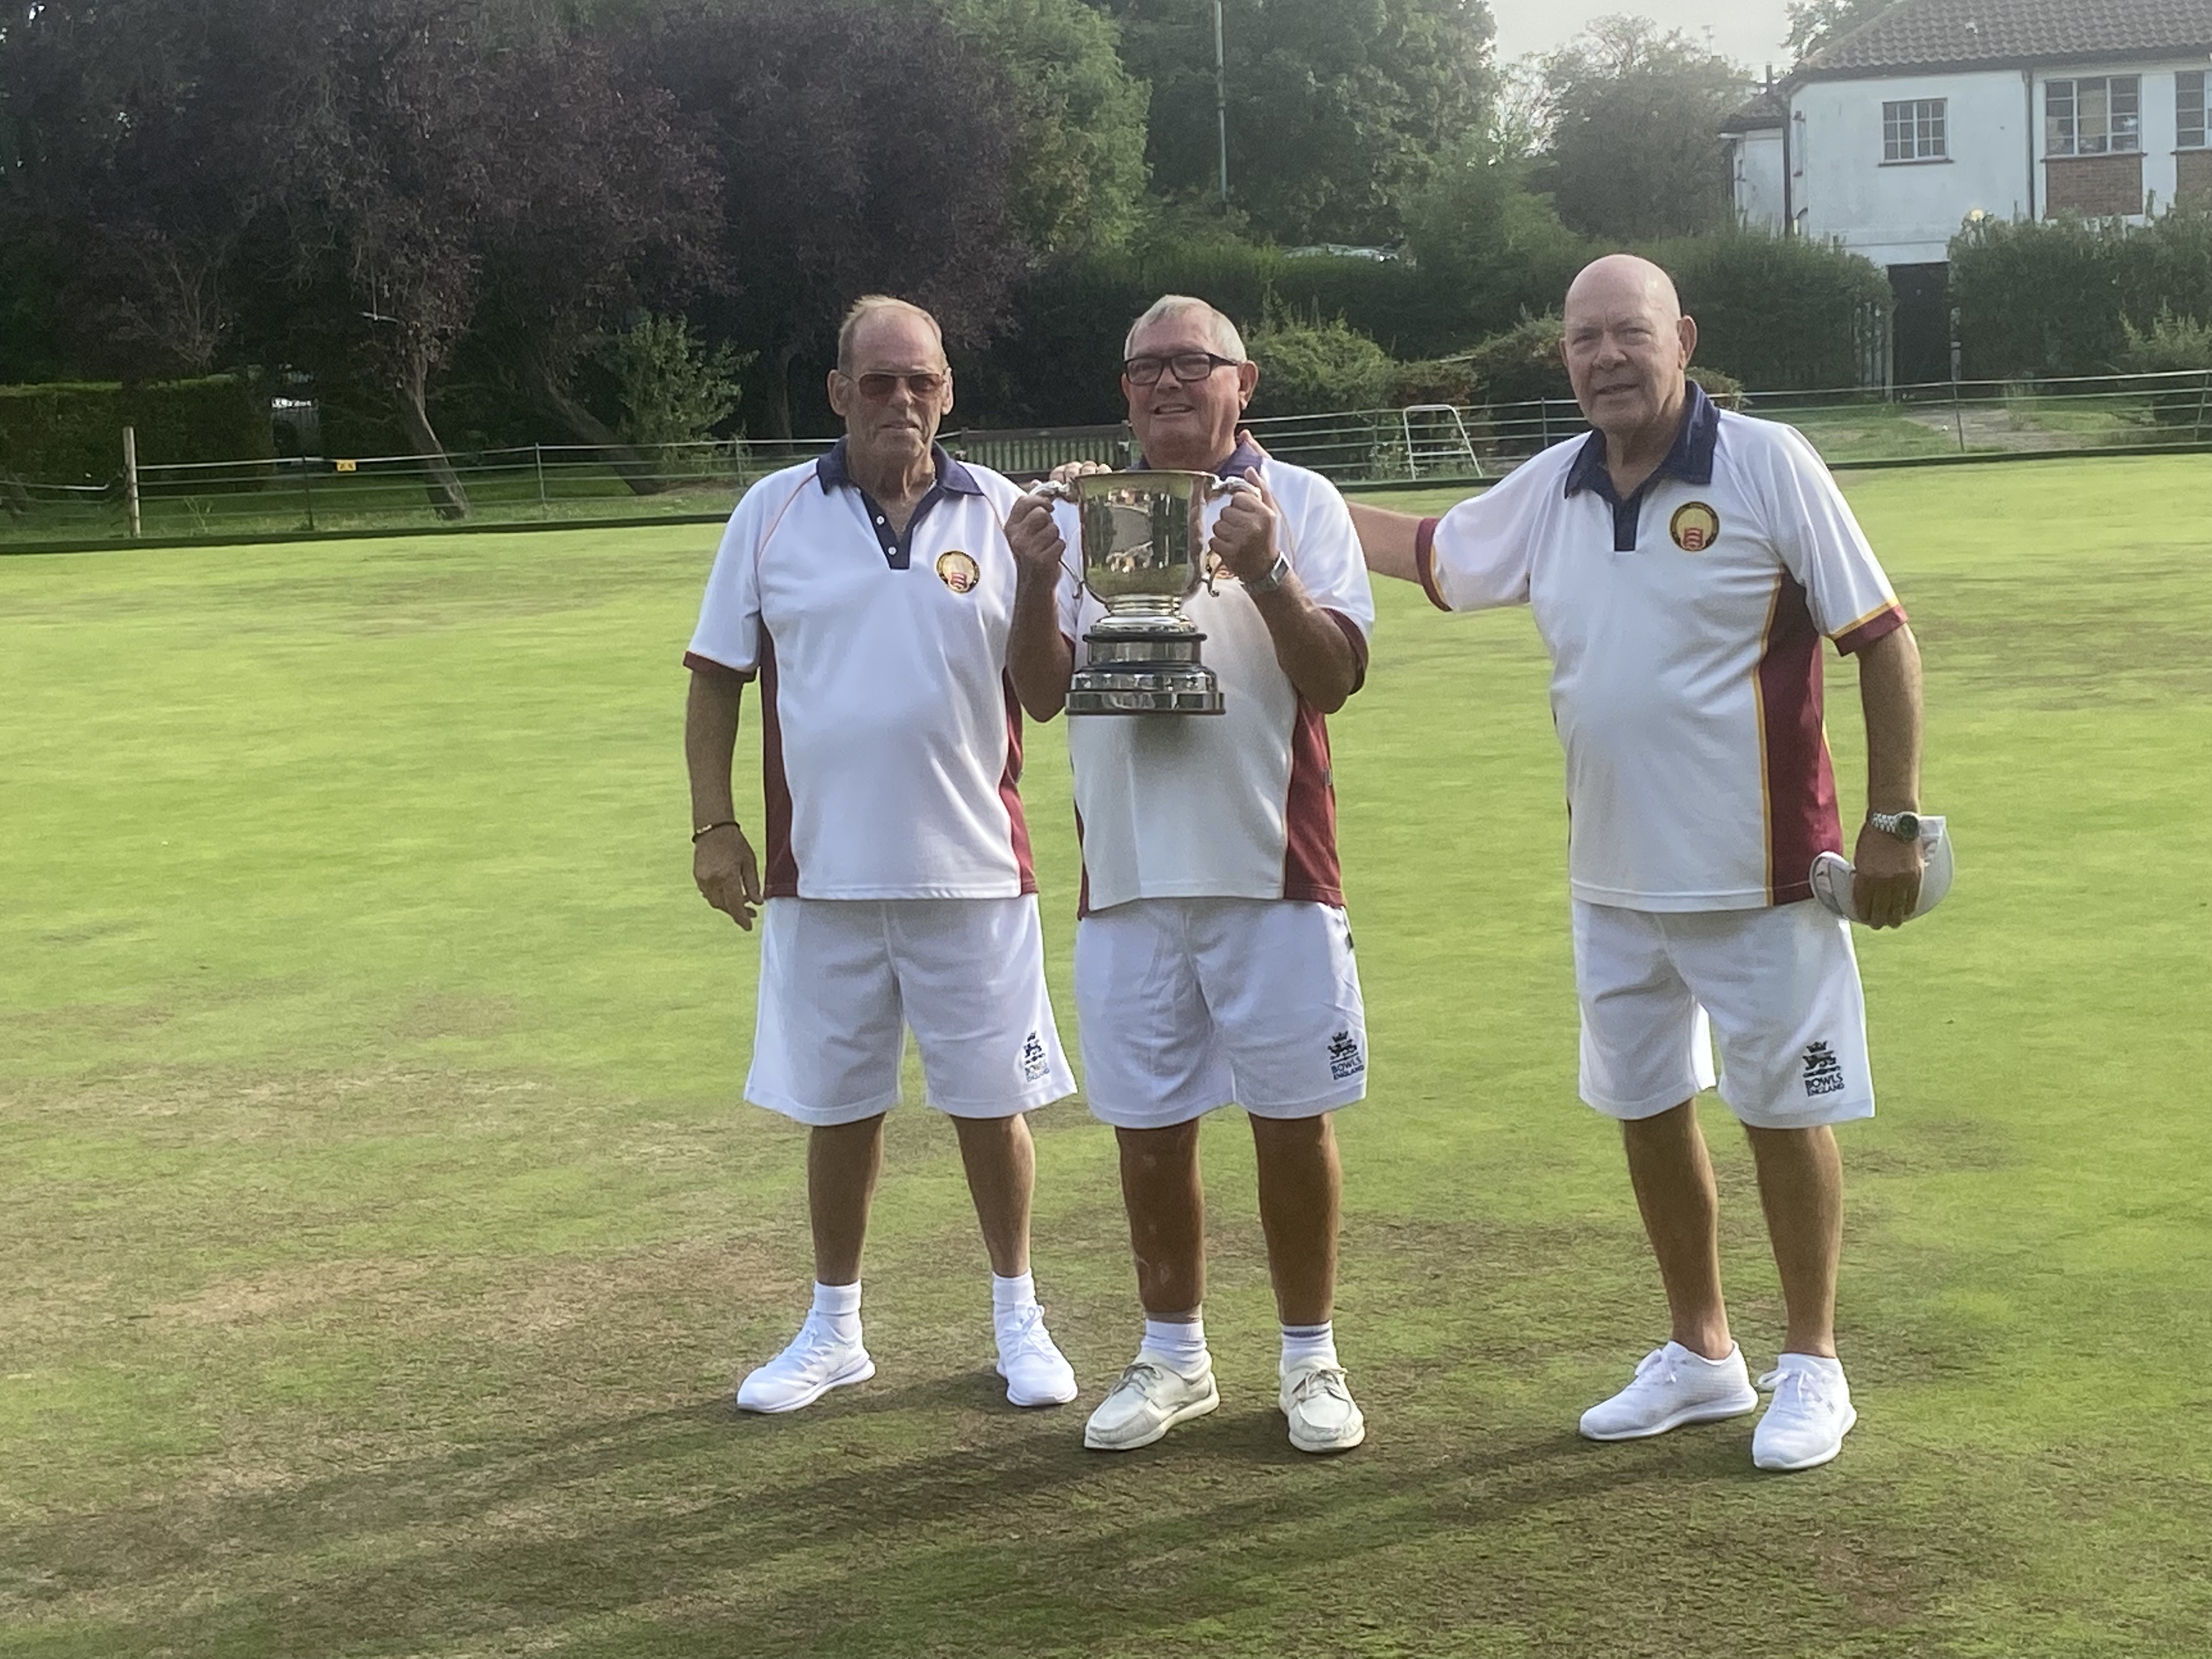 photo showing the romford trio with the trophy.